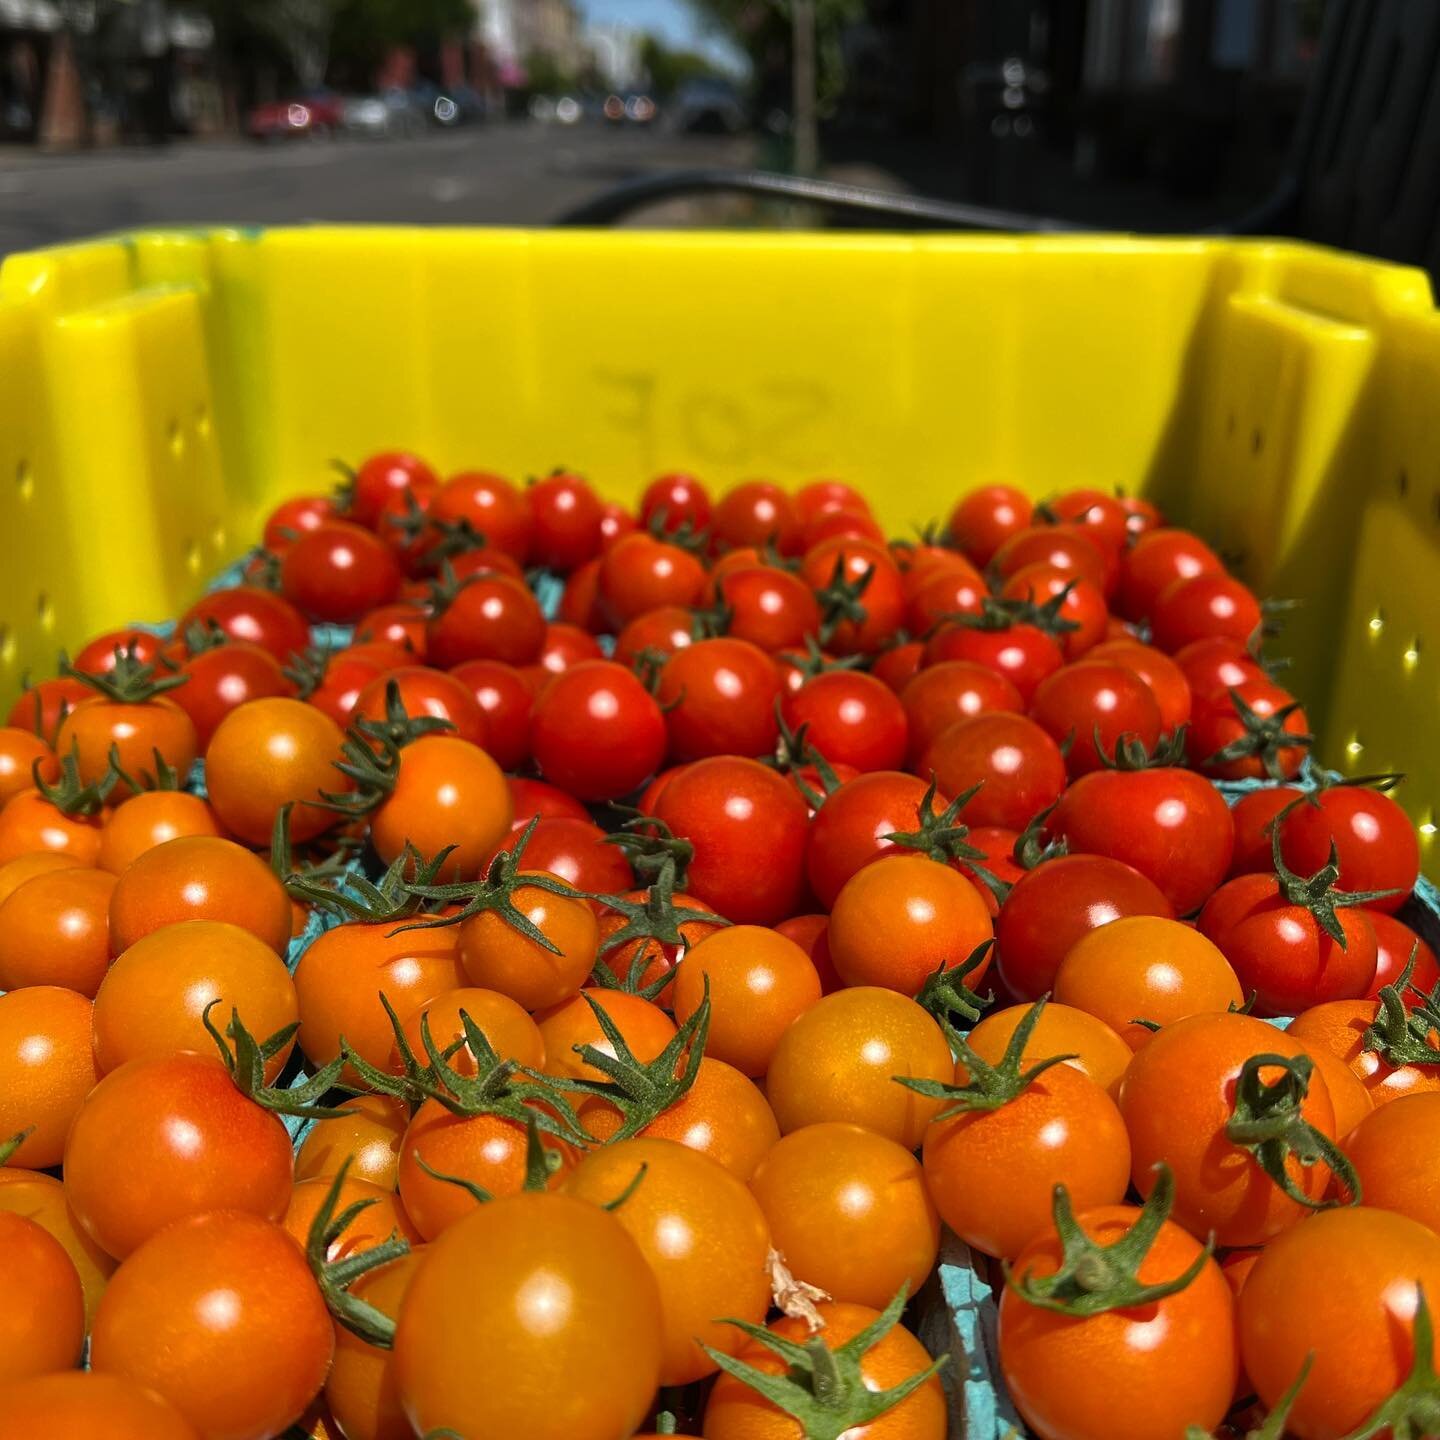 Our good friends from Sunrise Organic Farm in North Albany just delivered summer in a yellow bin! These tomatoes are so scrumptious &mdash; we can&rsquo;t wait to get cooking with them! 🌞🍅